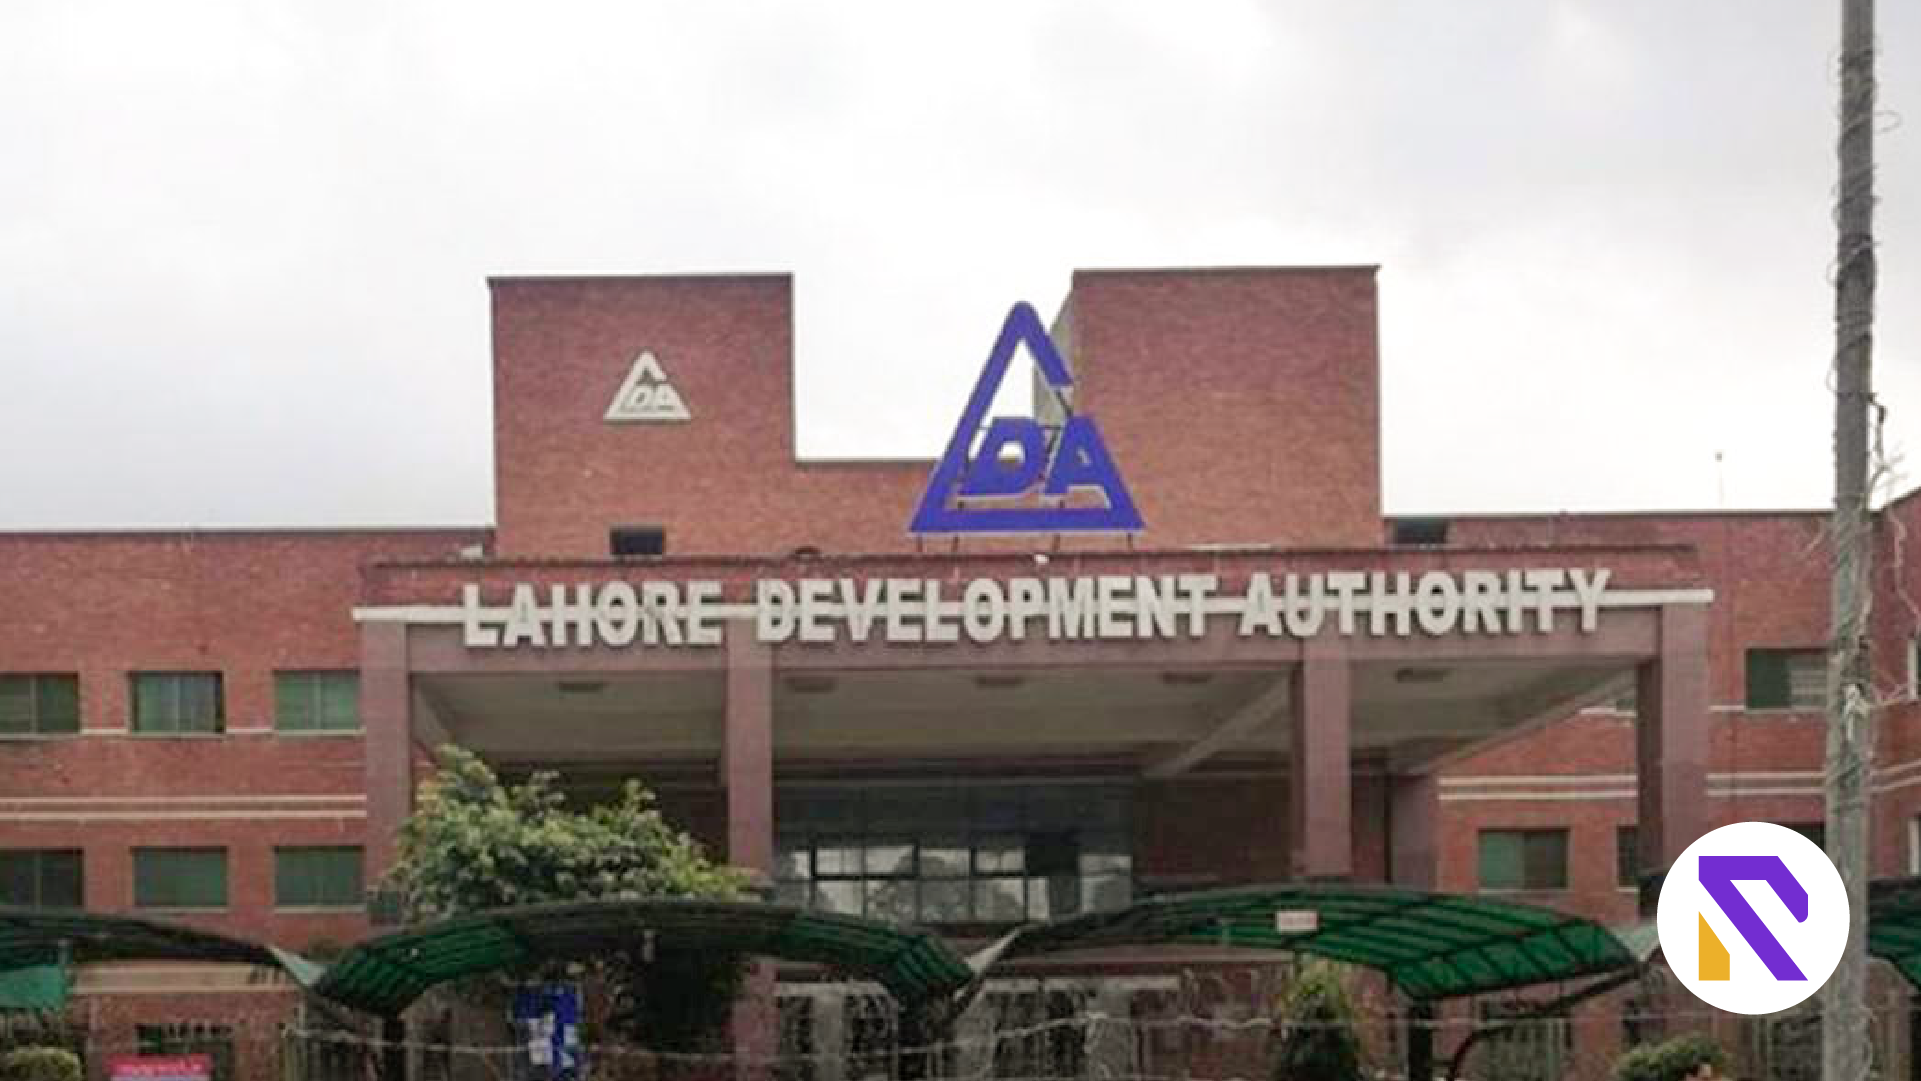 LDA asked to ensure presence of project area residents